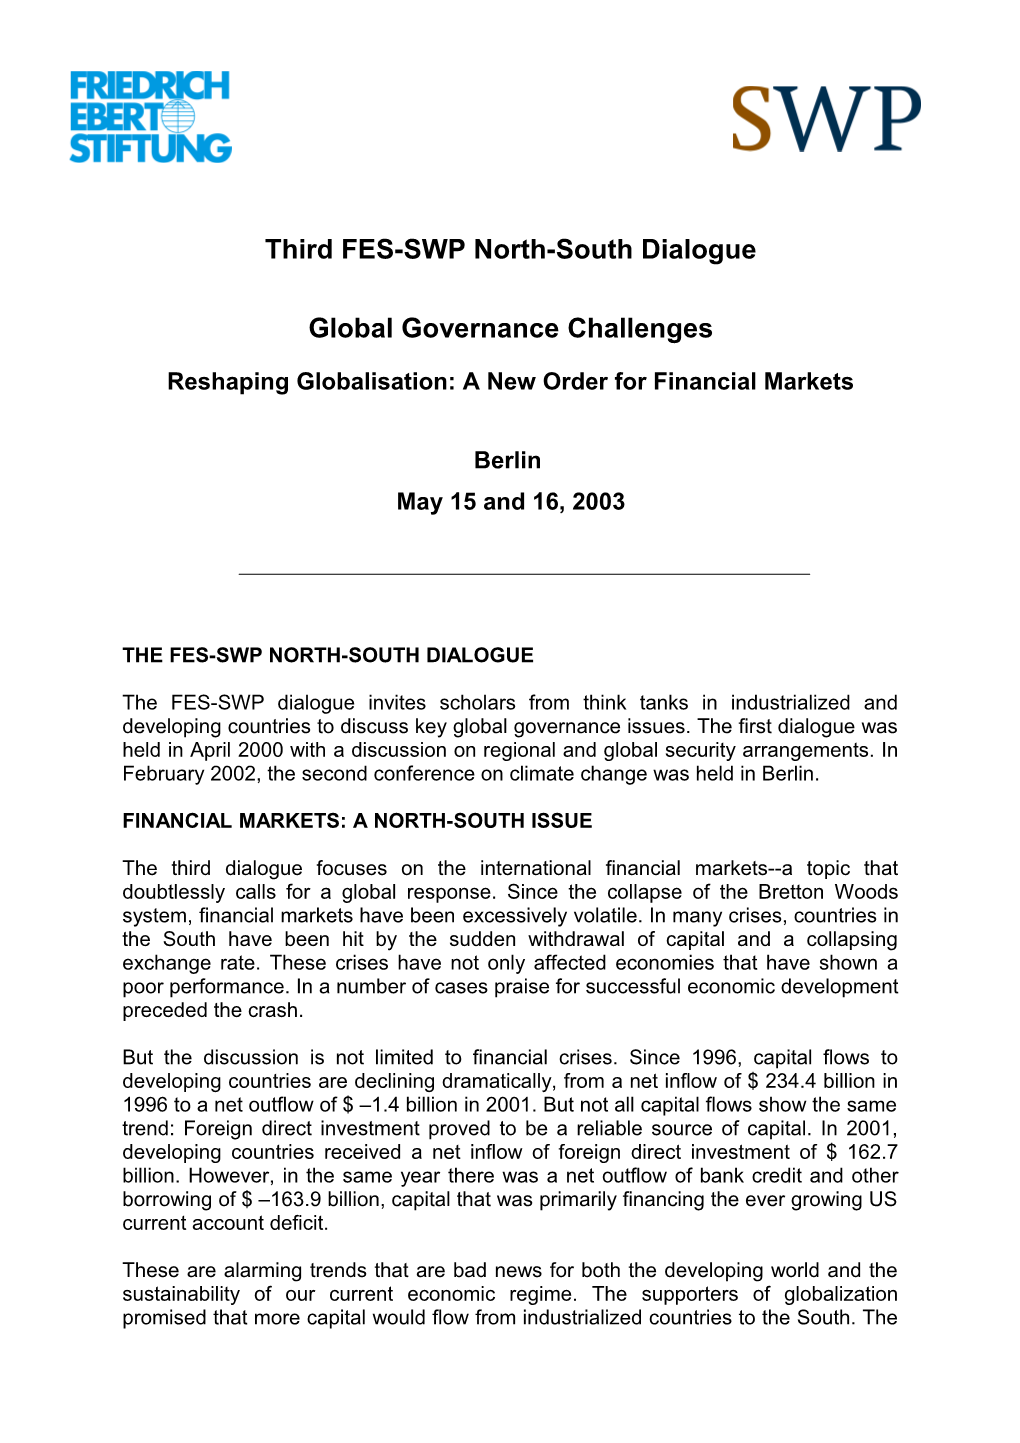 Second FES-SWP North South Dialogue